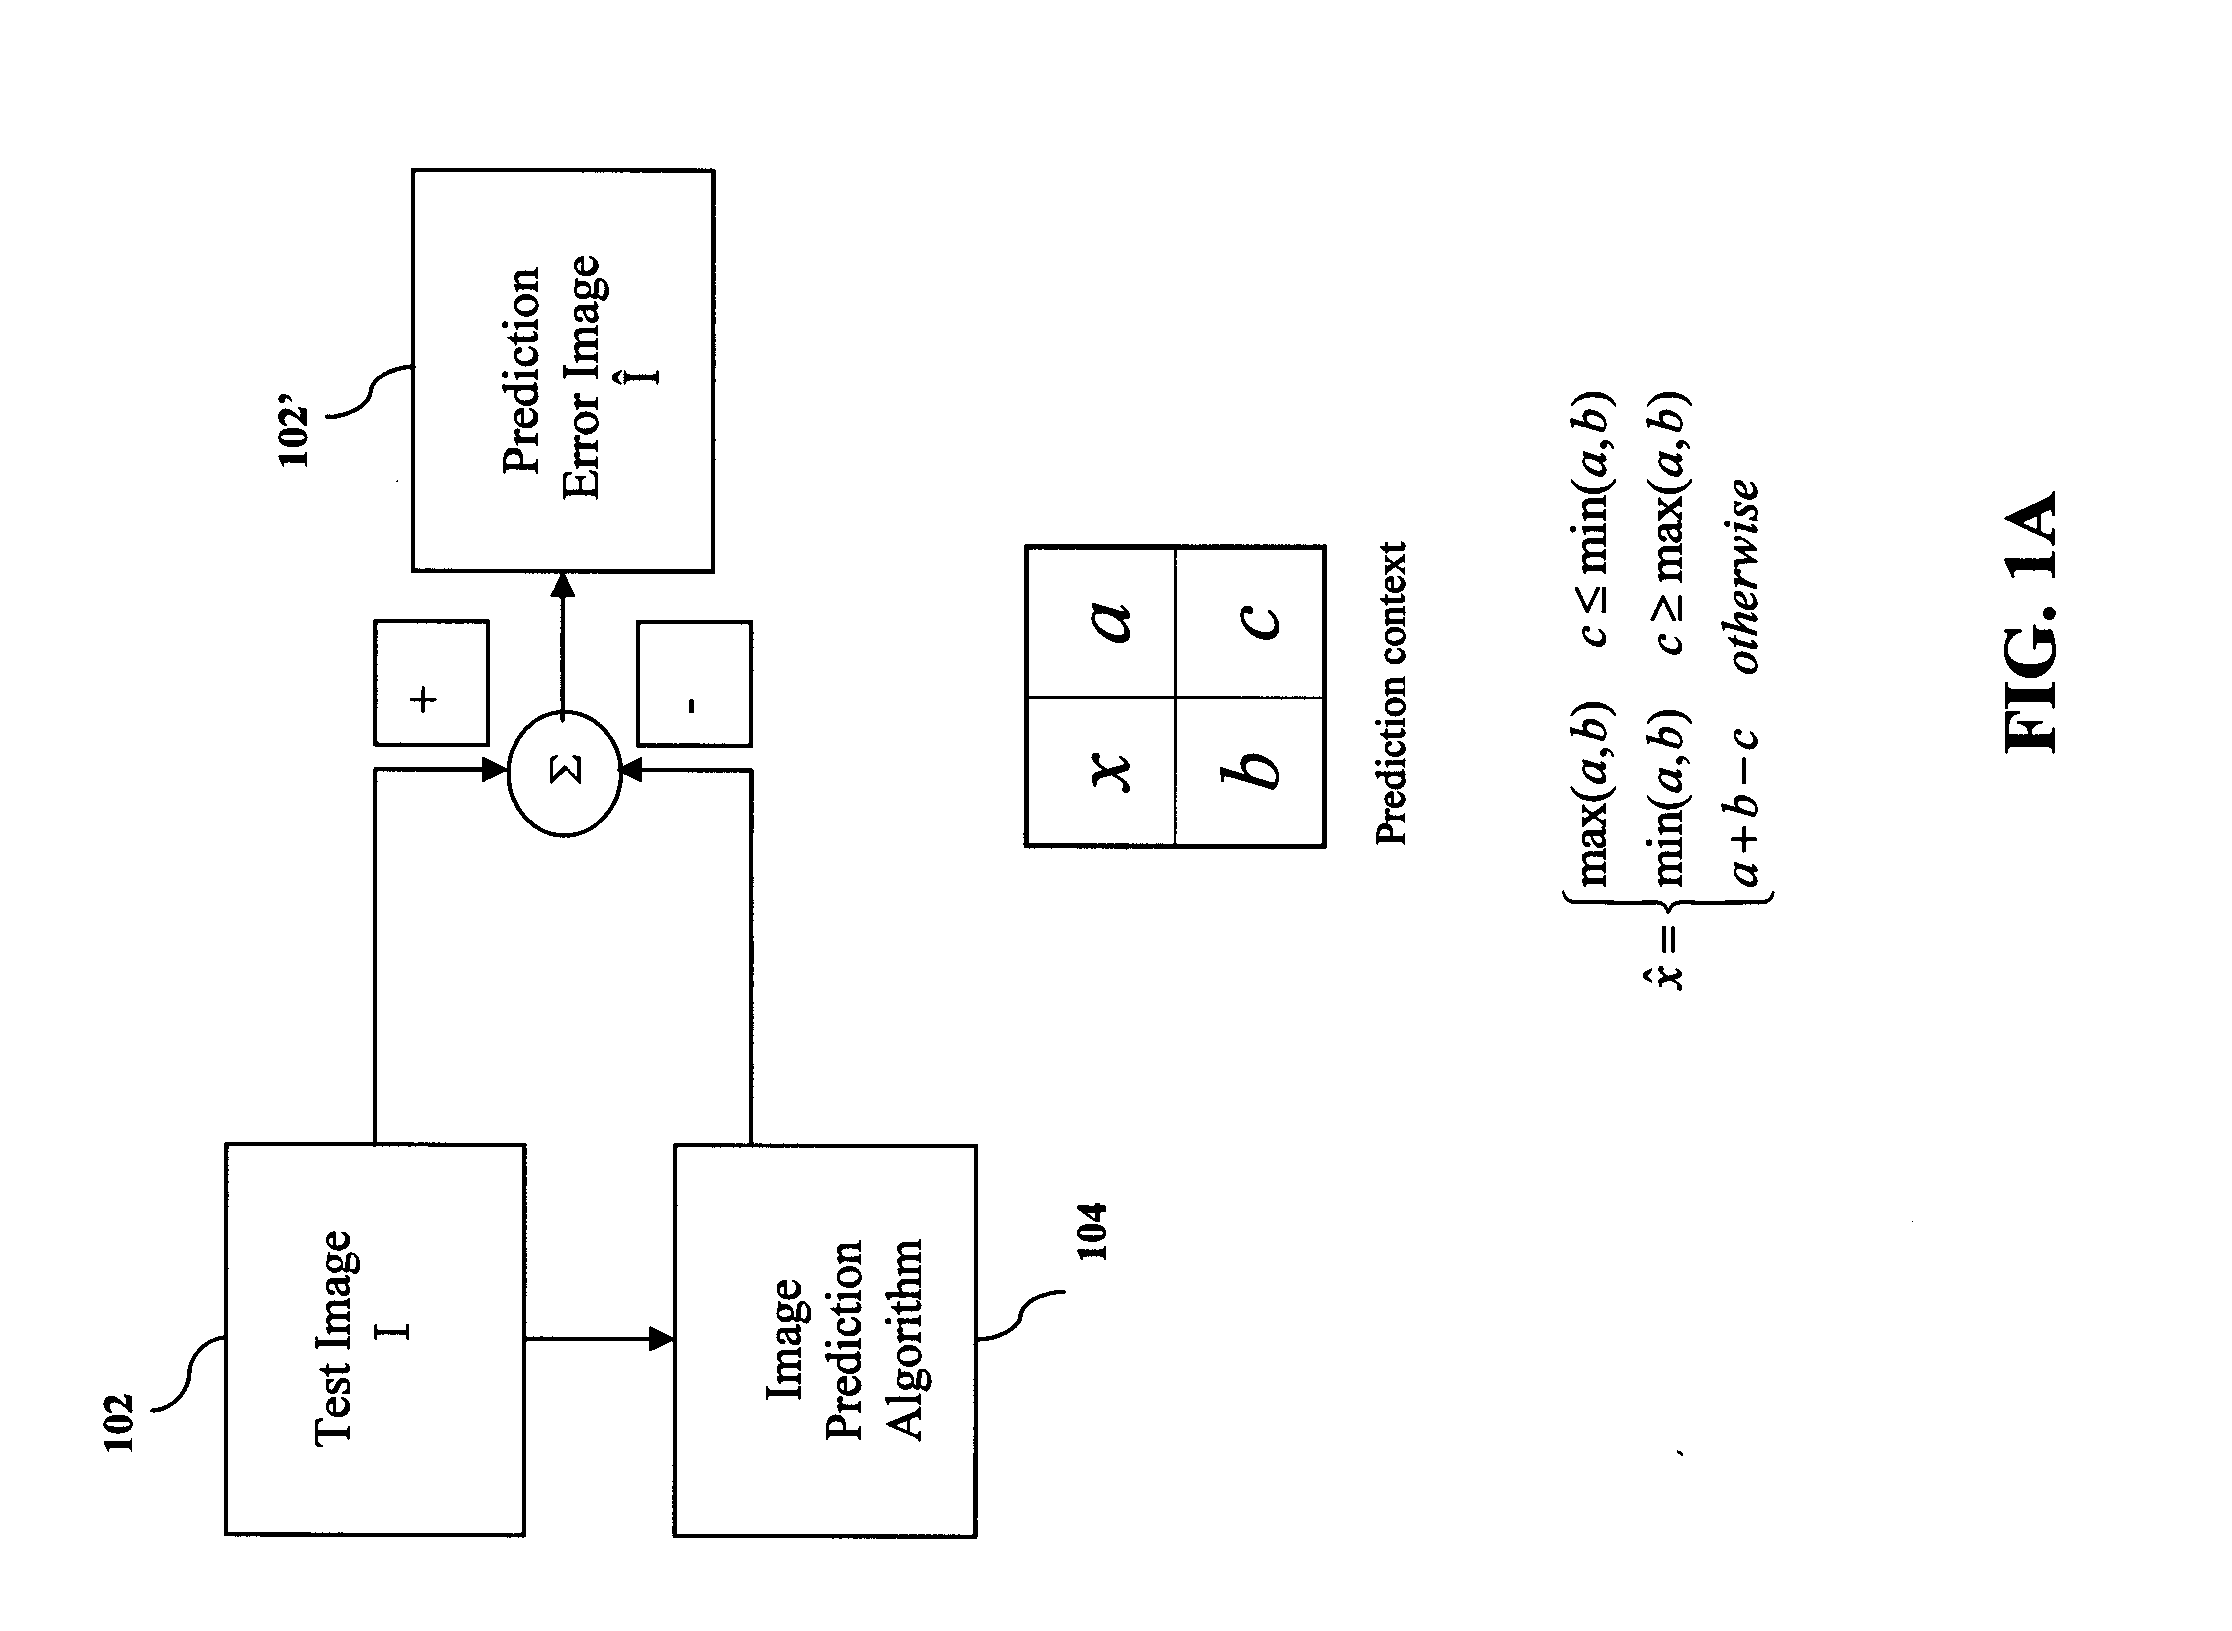 Method and apparatus for image splicing/tampering detection using moments of wavelet characteristic functions and statistics of 2-d phase congruency arrays